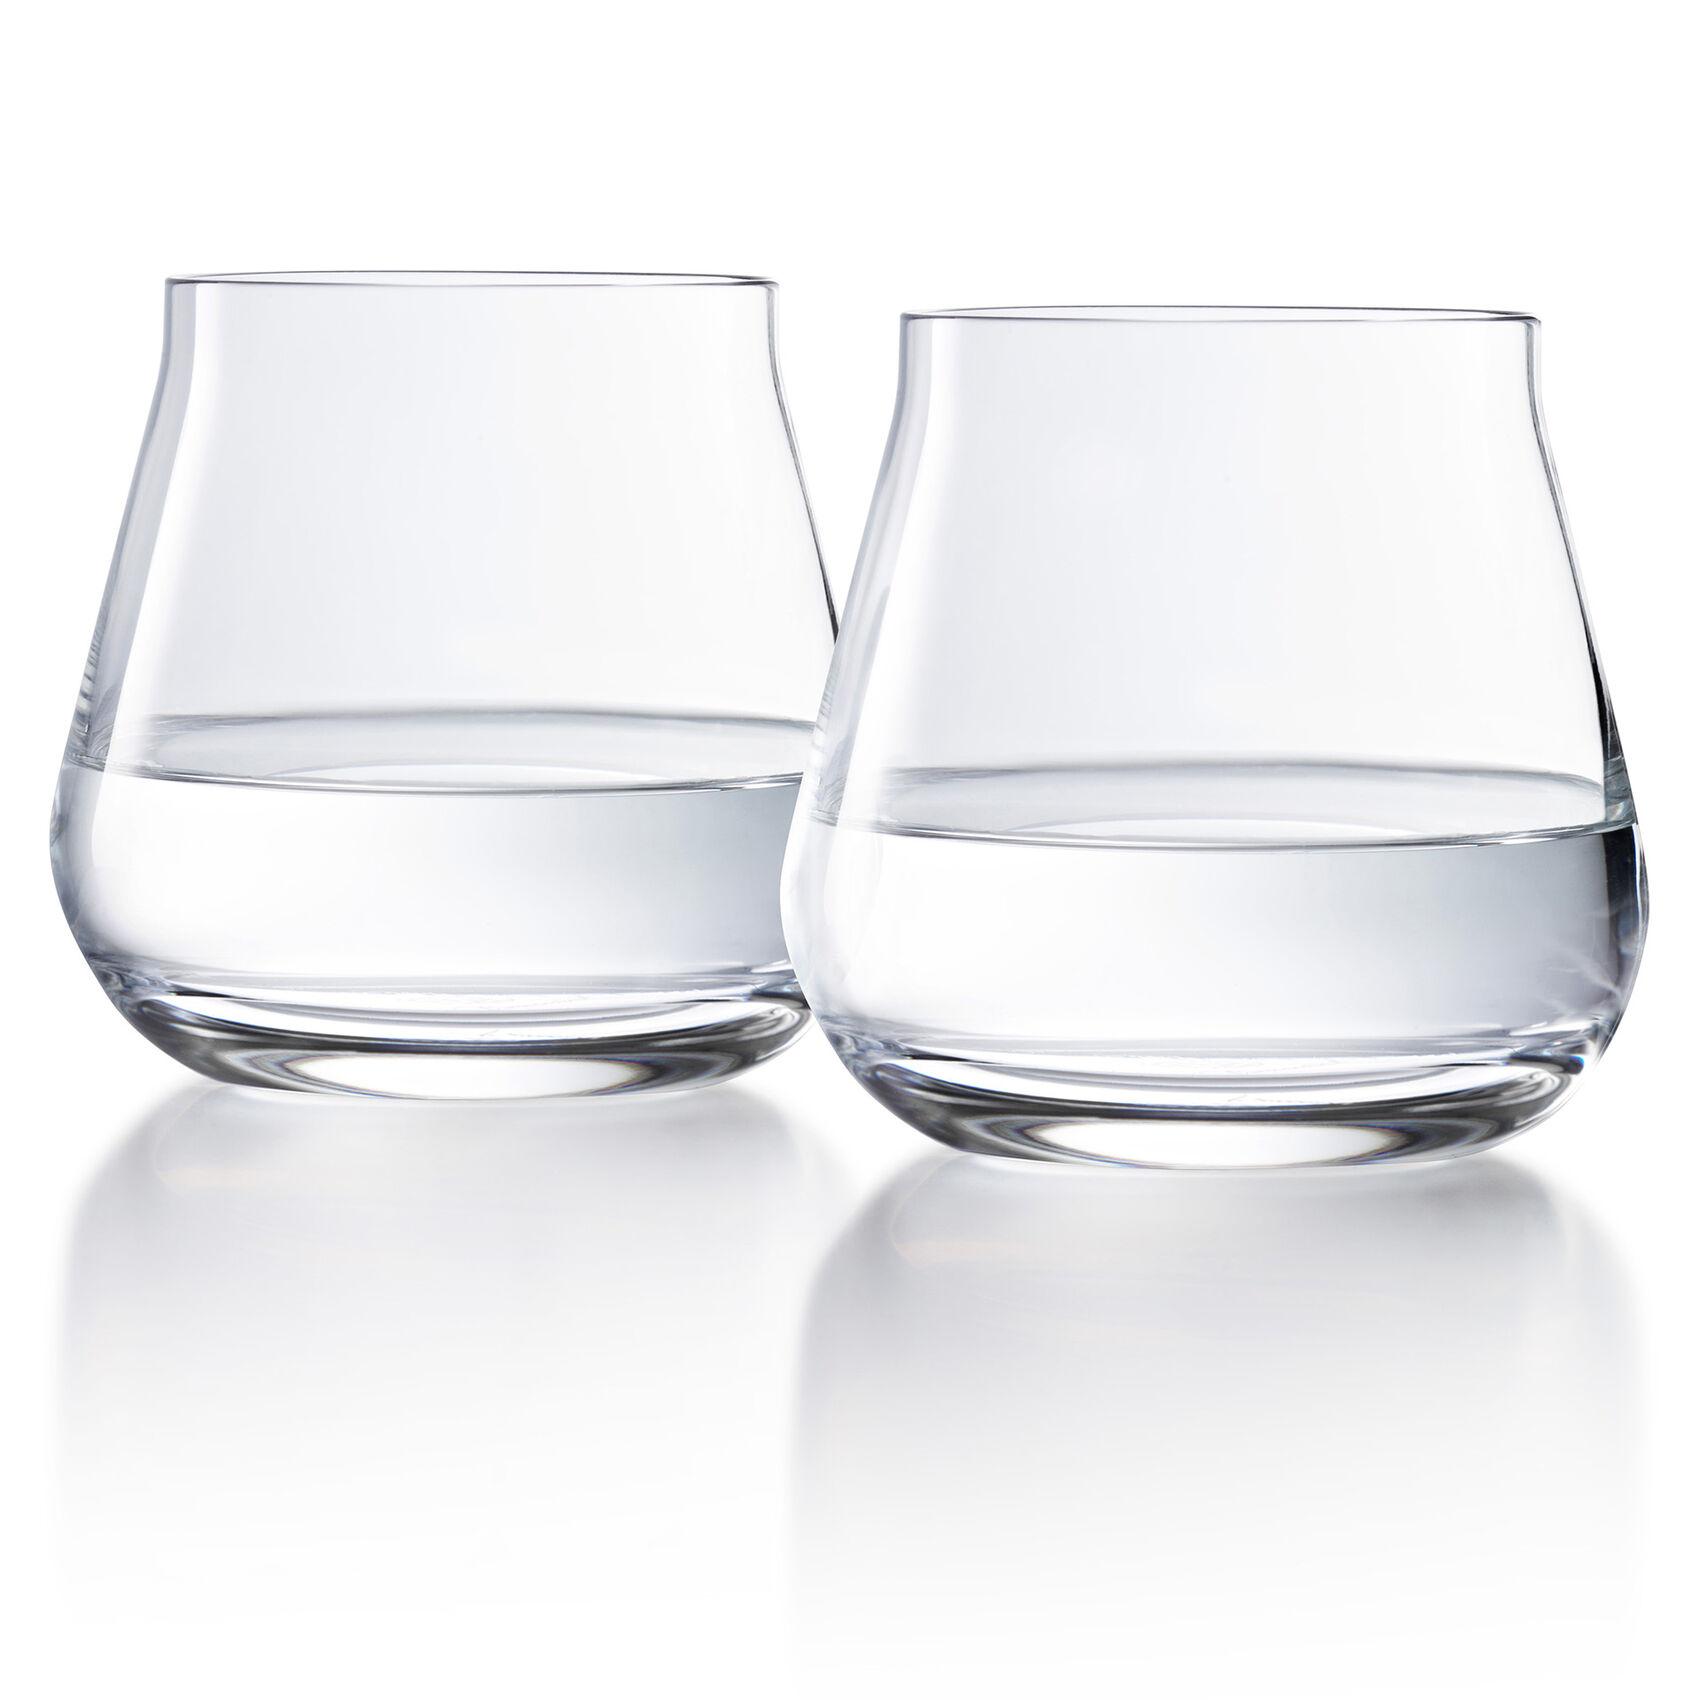 Baccarat Chateau Large Tumblers, set of two 0